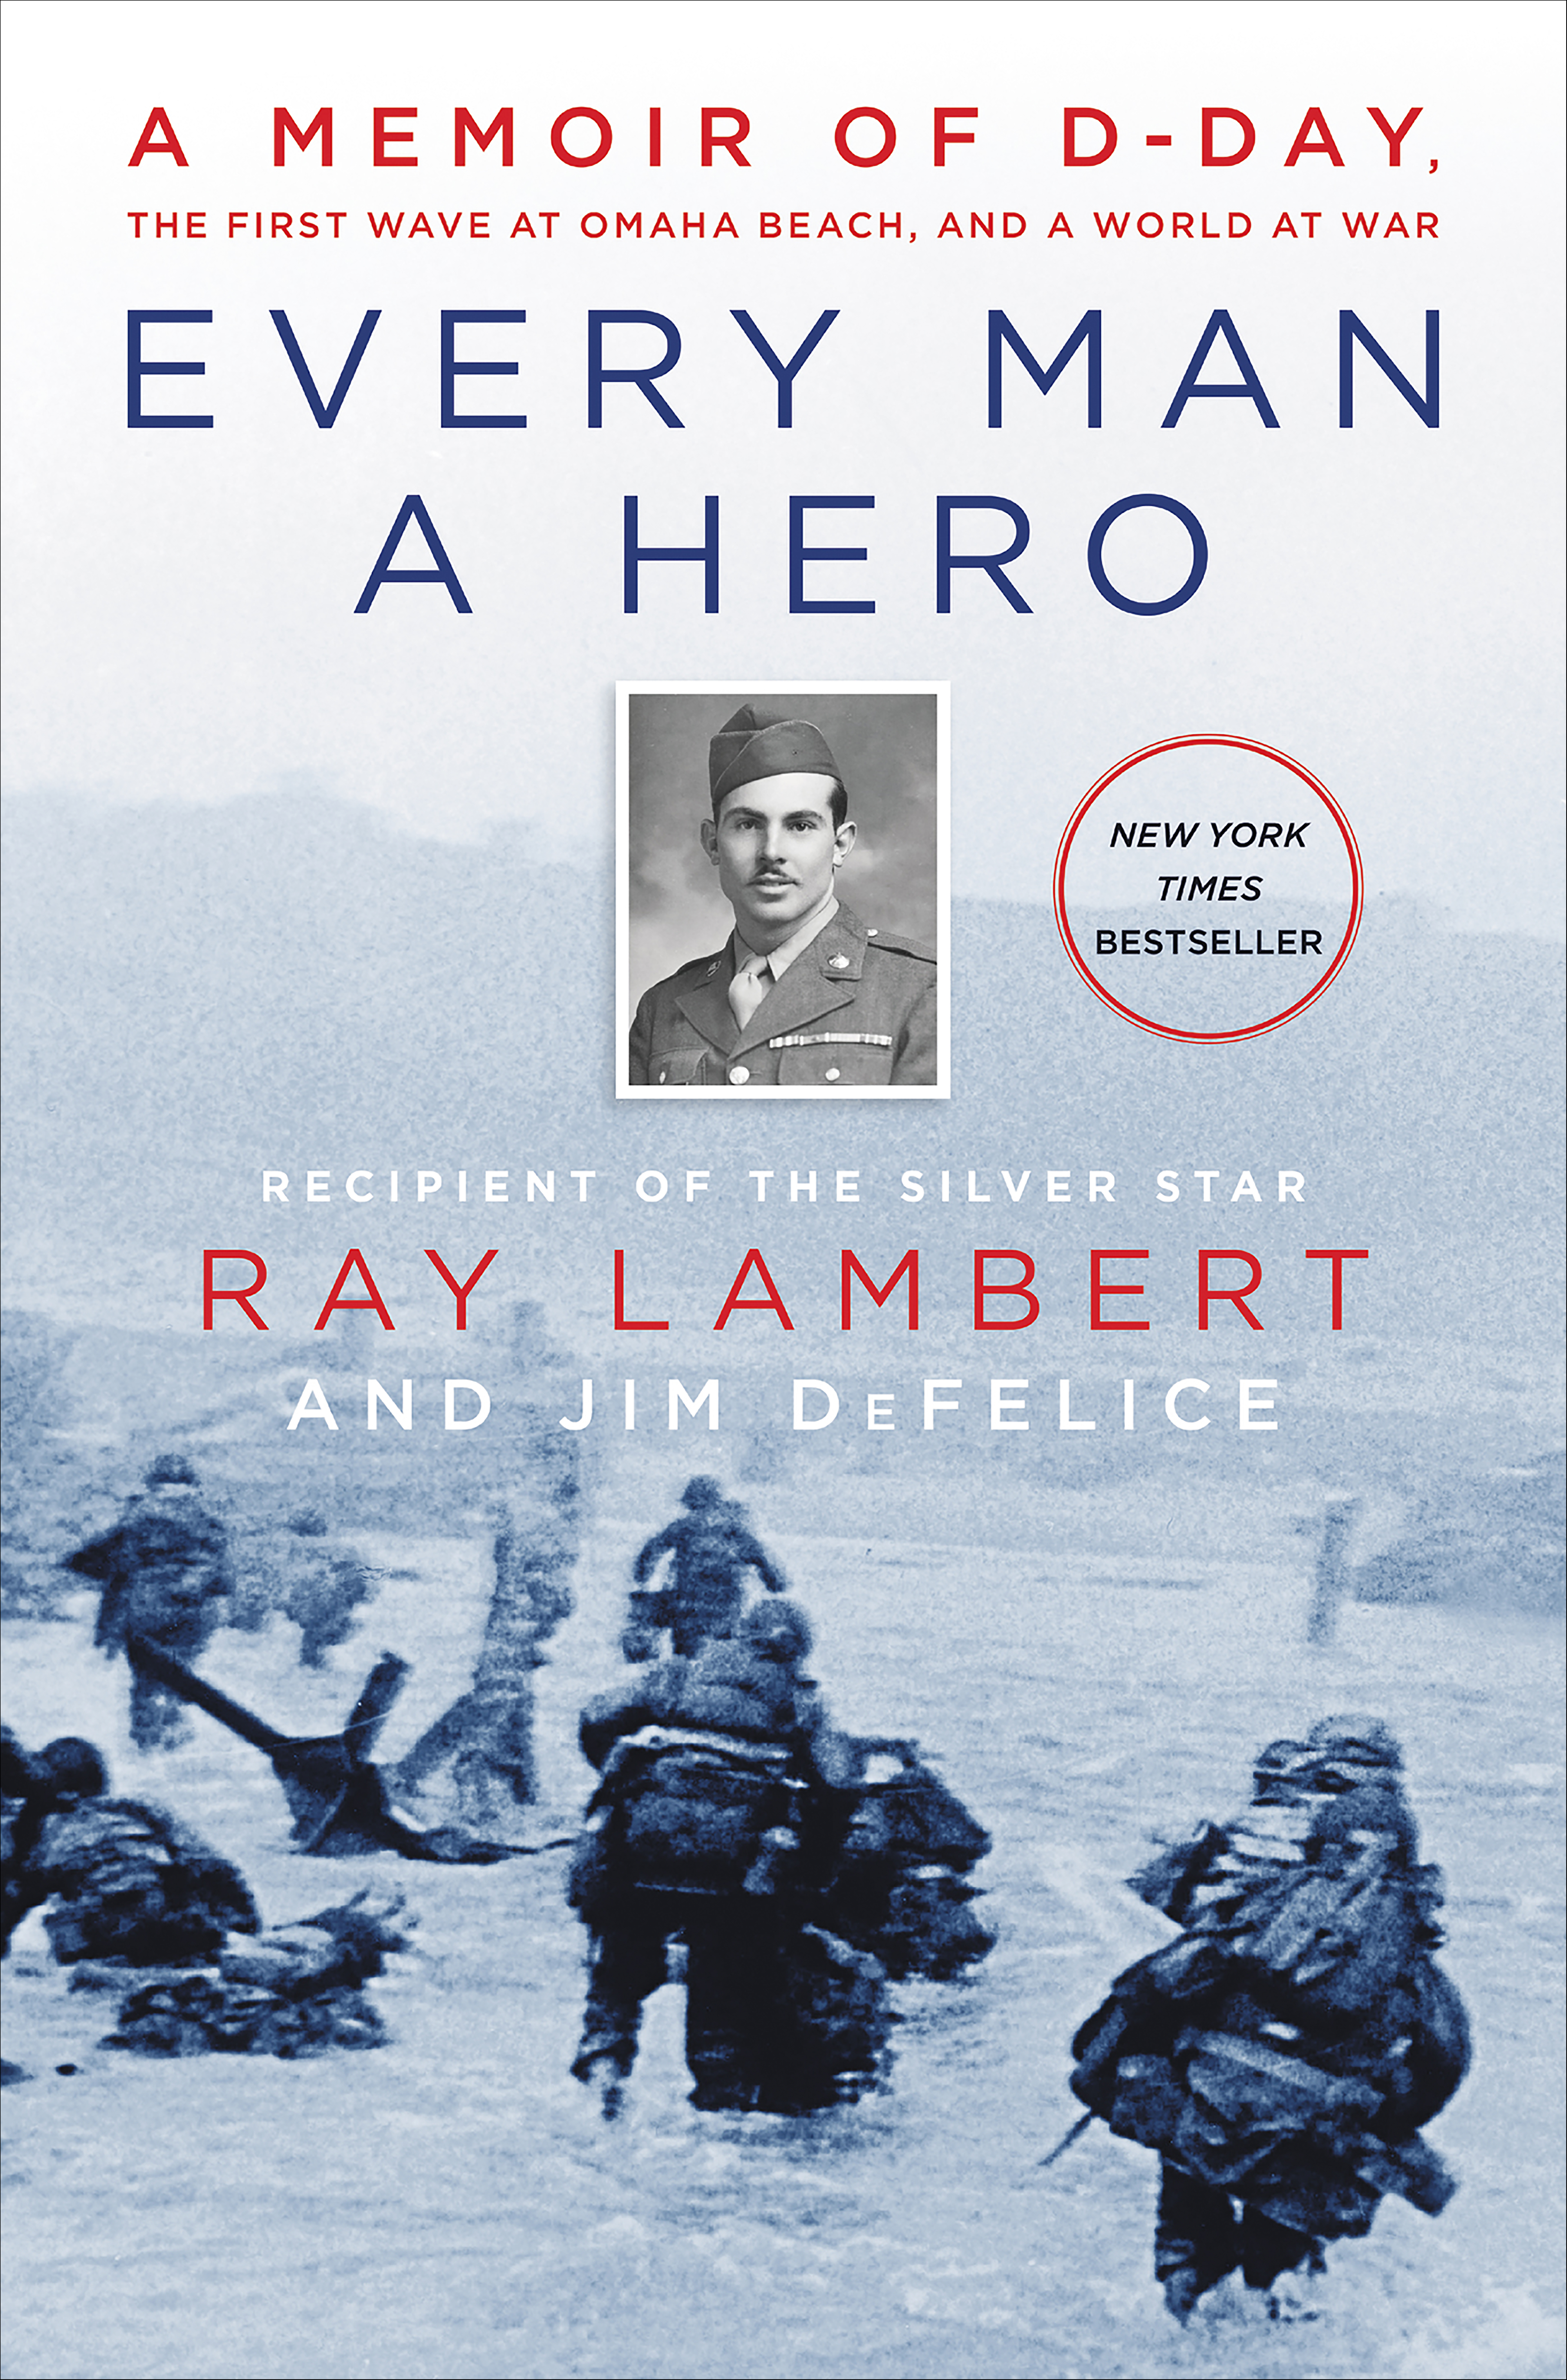 Every man a hero a memoir of D-Day, the first wave at Omaha Beach, and a world at war cover image